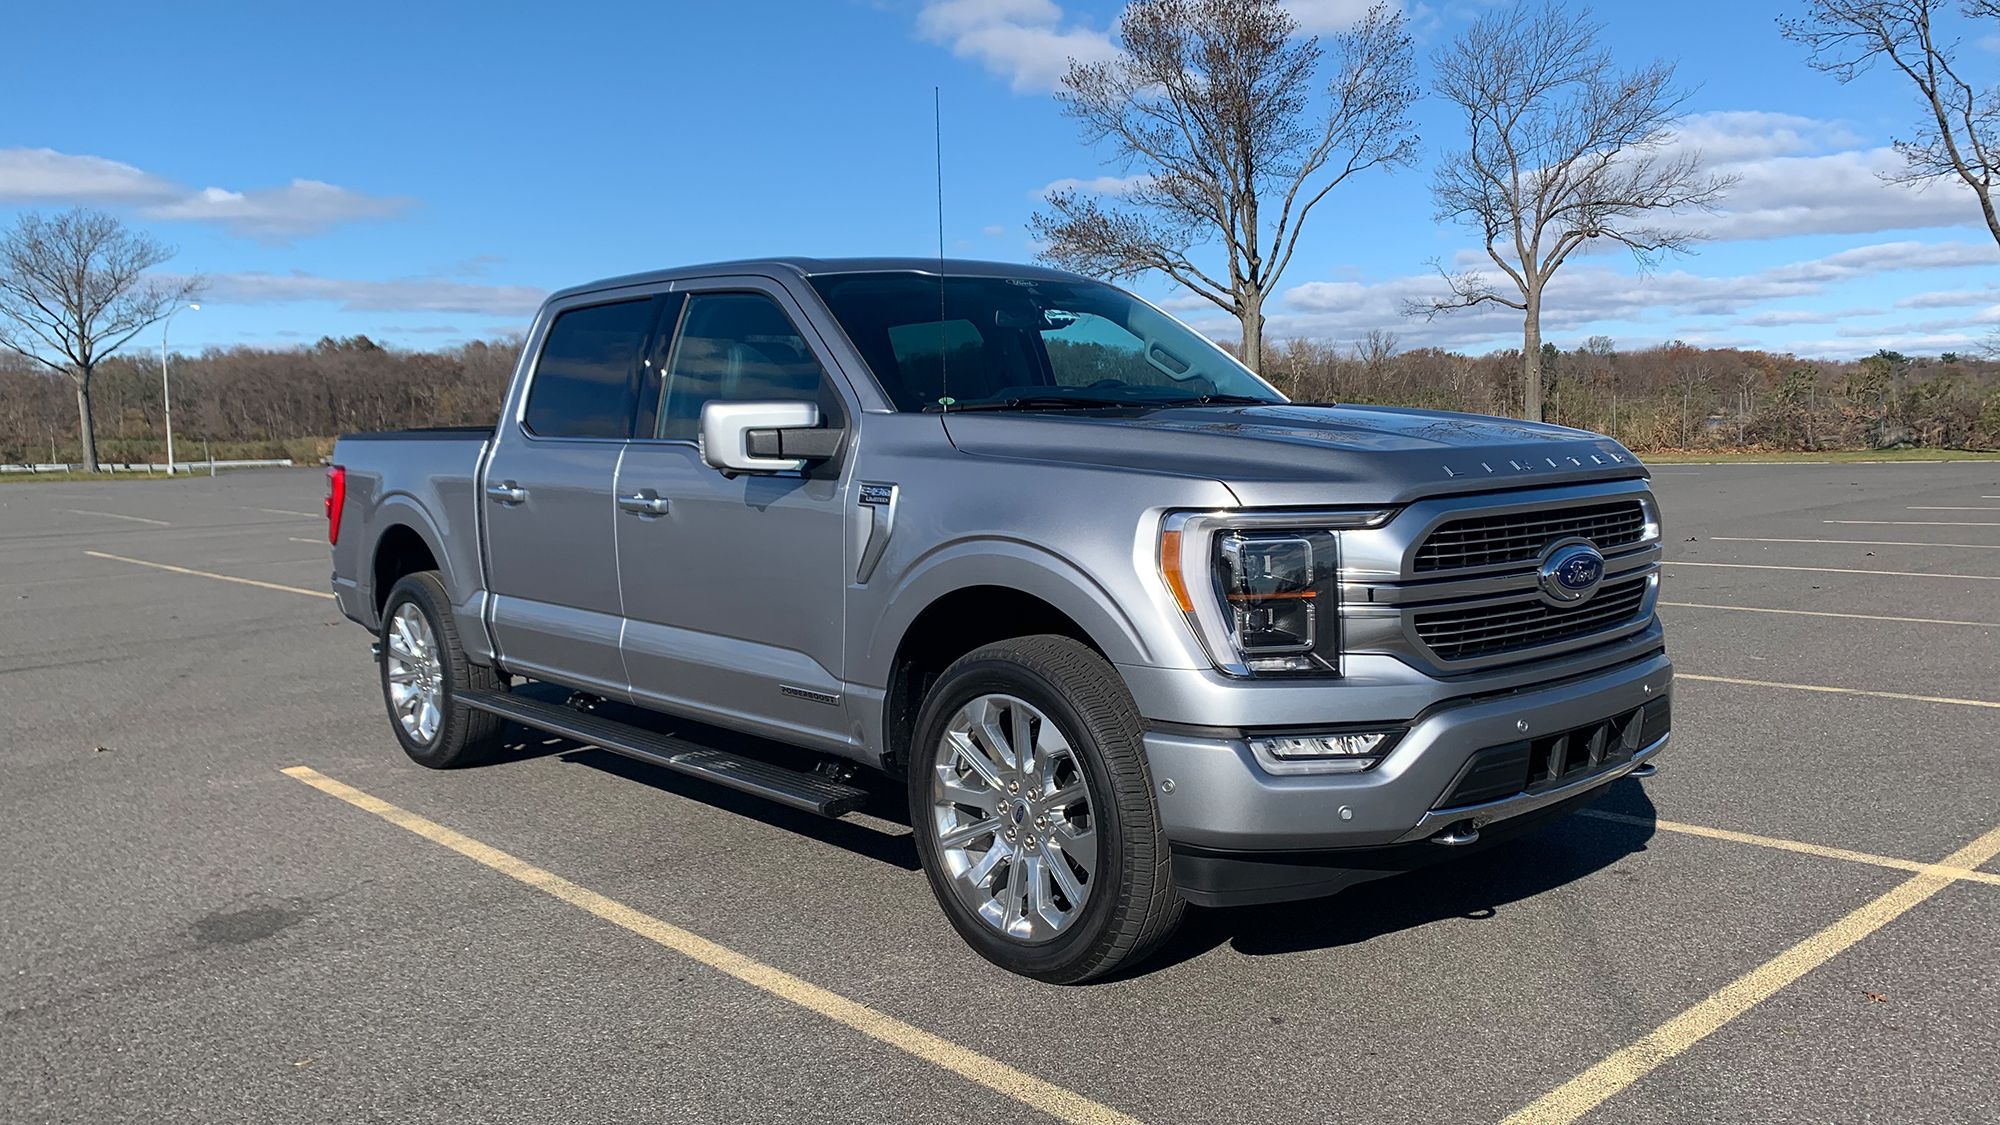 Ford's F-150 hybrid pickup is the ultimate remote workspace and